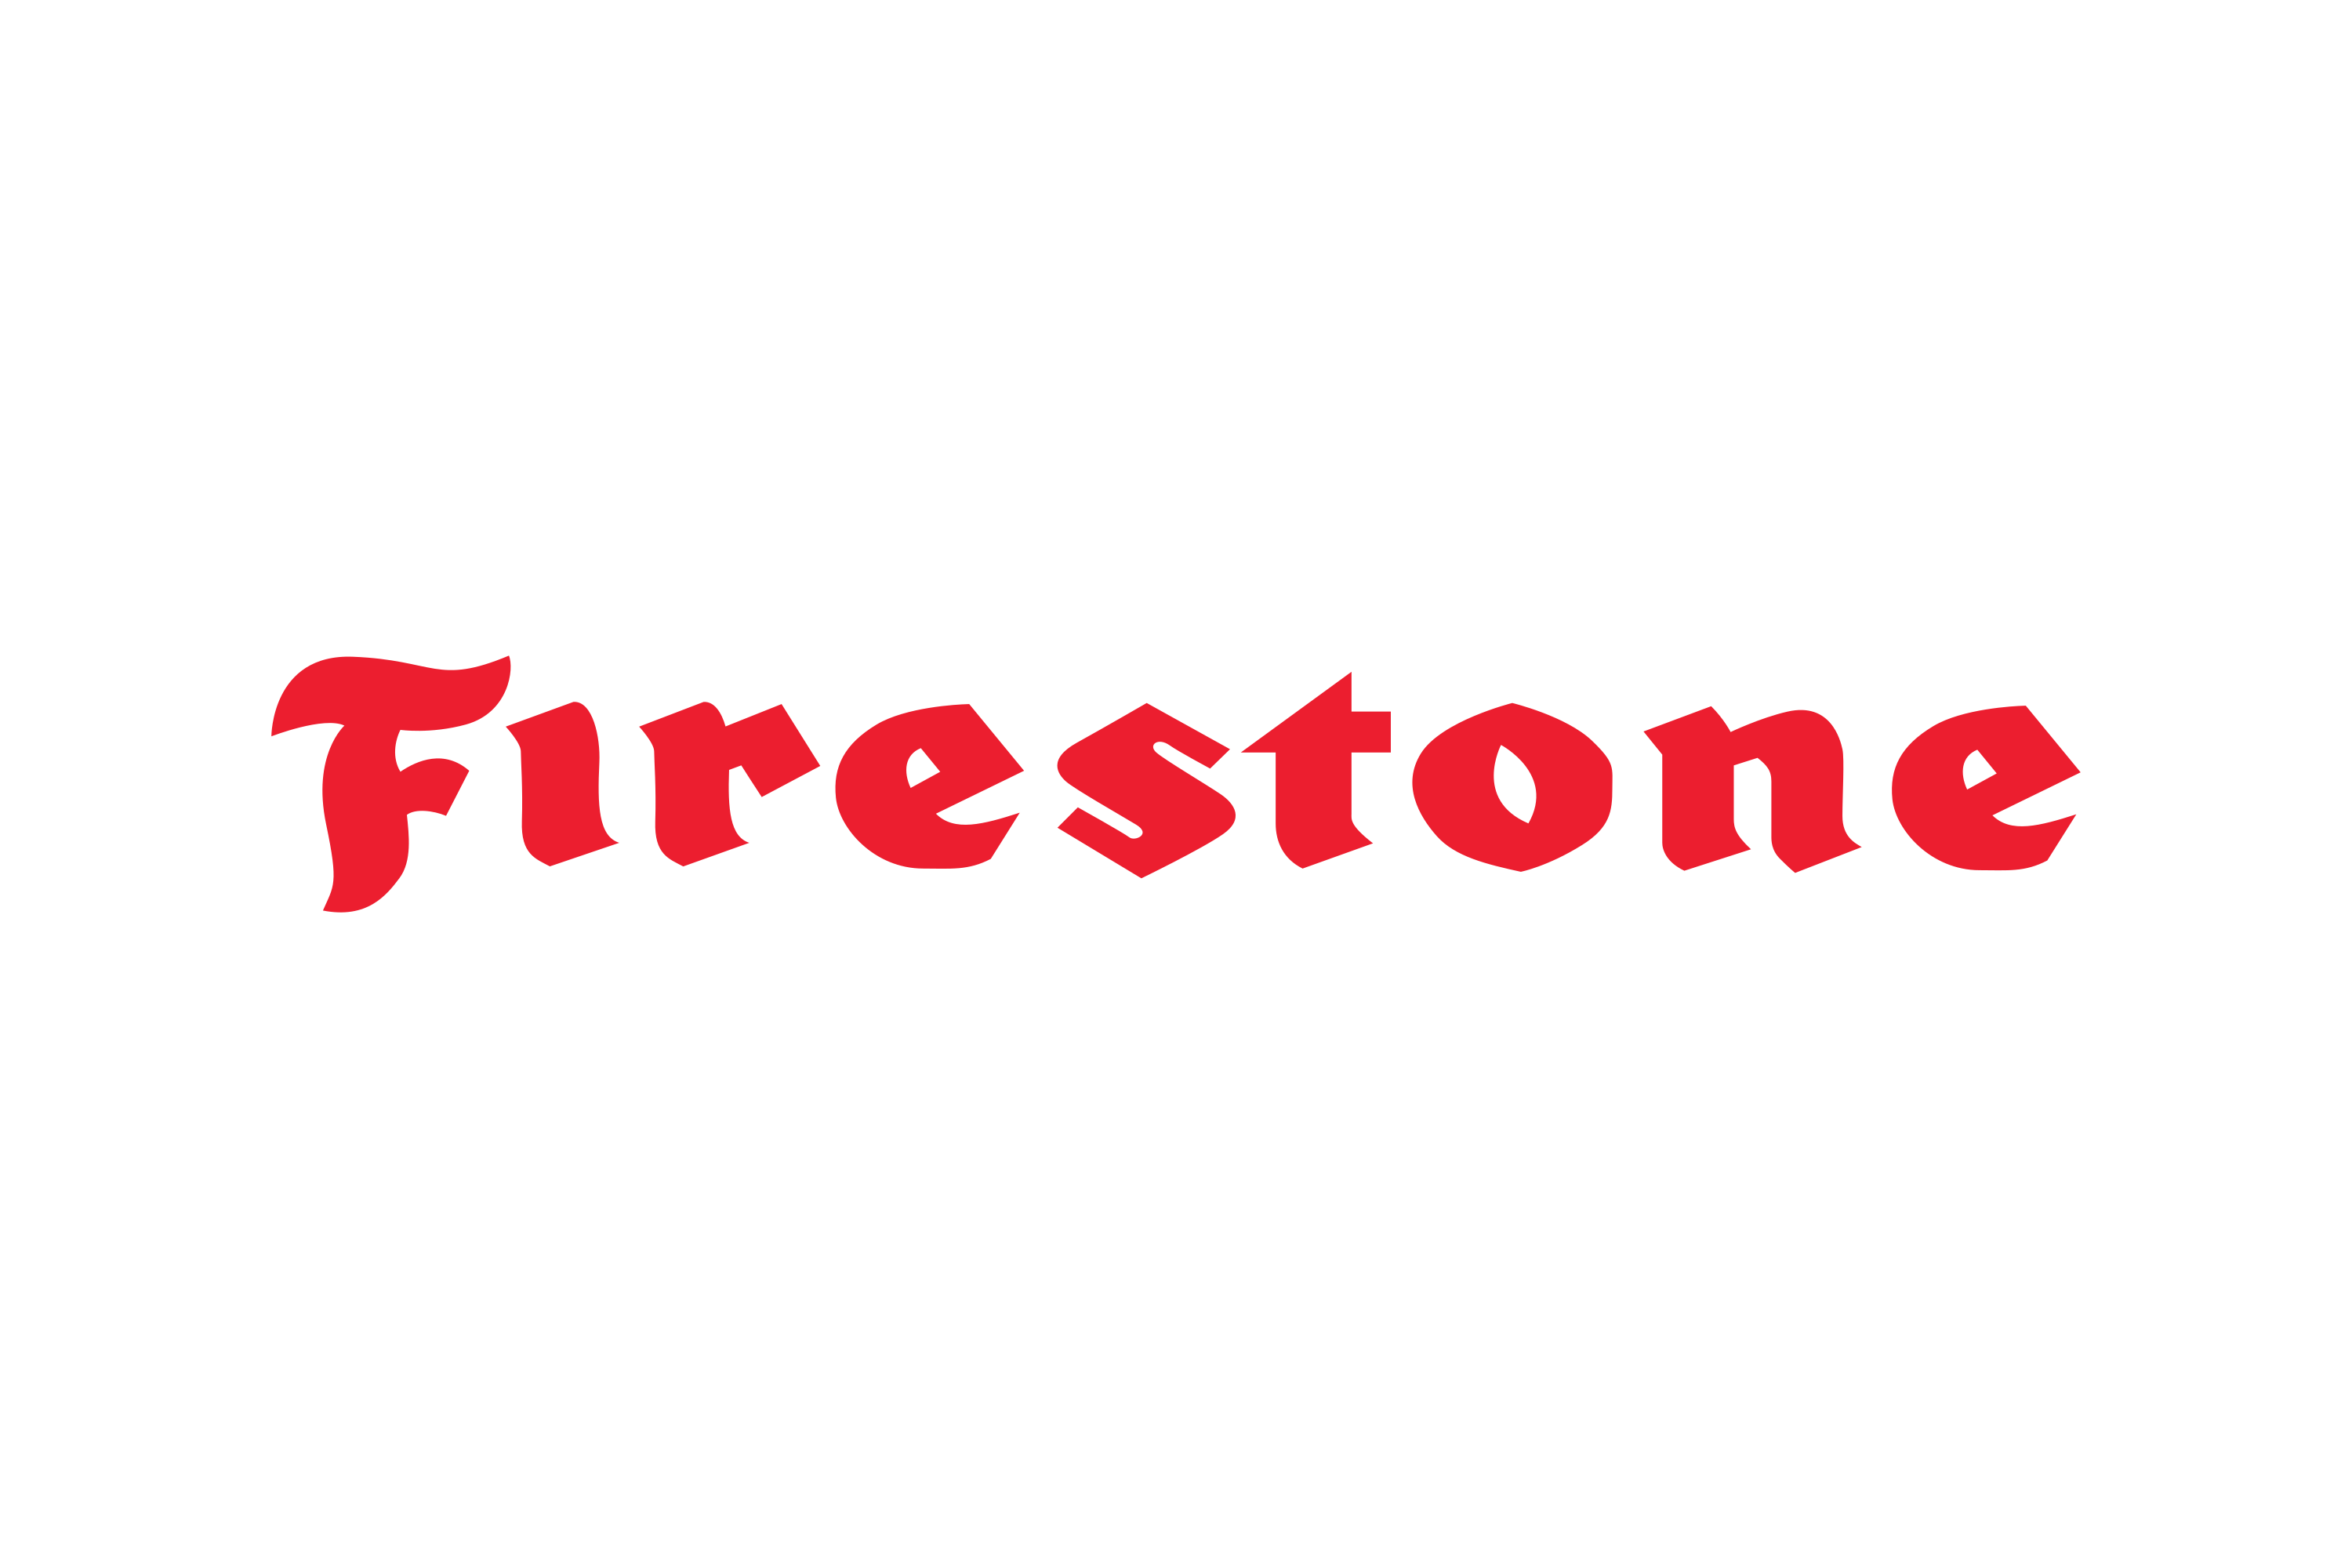 Download Firestone Tire and Rubber Company Logo in SVG Vector or PNG